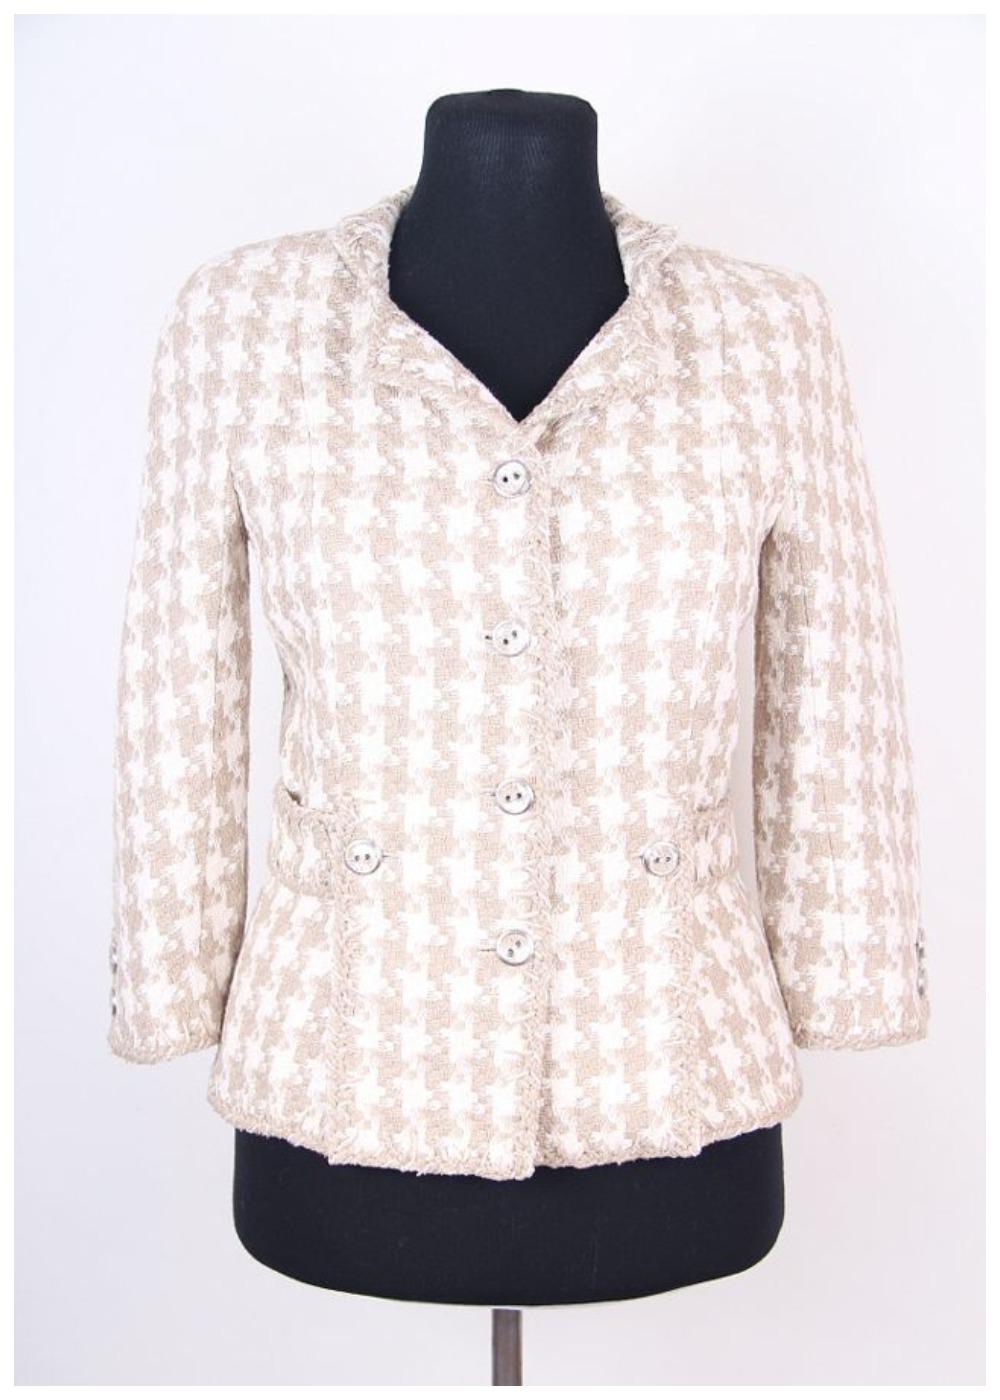 Chanel & Karl Lagerfeld 08P 2008 Beige/White Hound's-Tooth Tweed Silk jacket 34 Fr
Karl Lagerfeld pour Chanel
Collectional : Chanel 2008 Printemps

Composition : 100% soie ; doublure : 100% soie.
Pays de production : France
Dimensions
Chanel Style :